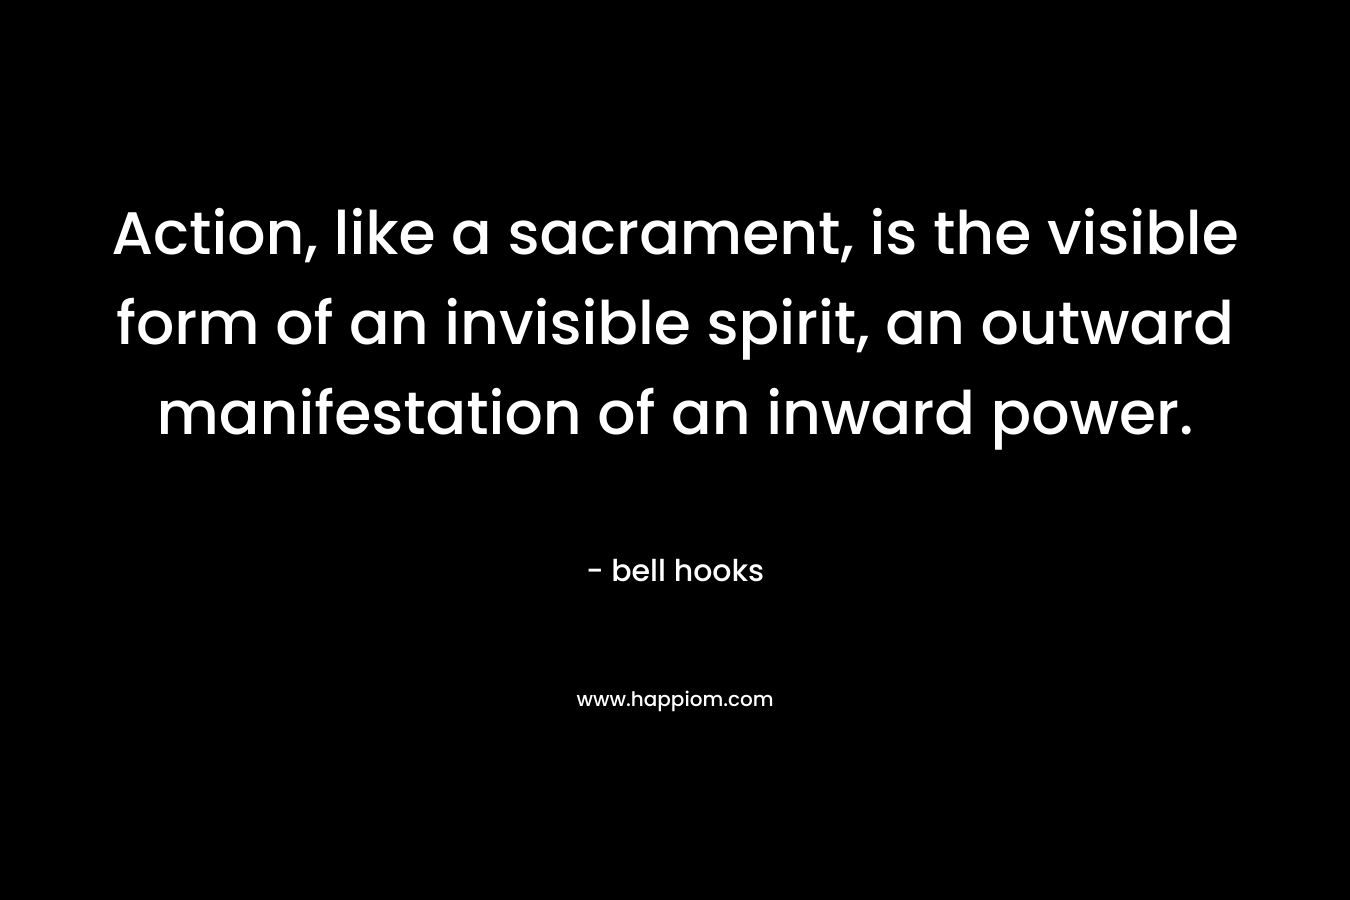 Action, like a sacrament, is the visible form of an invisible spirit, an outward manifestation of an inward power. – bell hooks